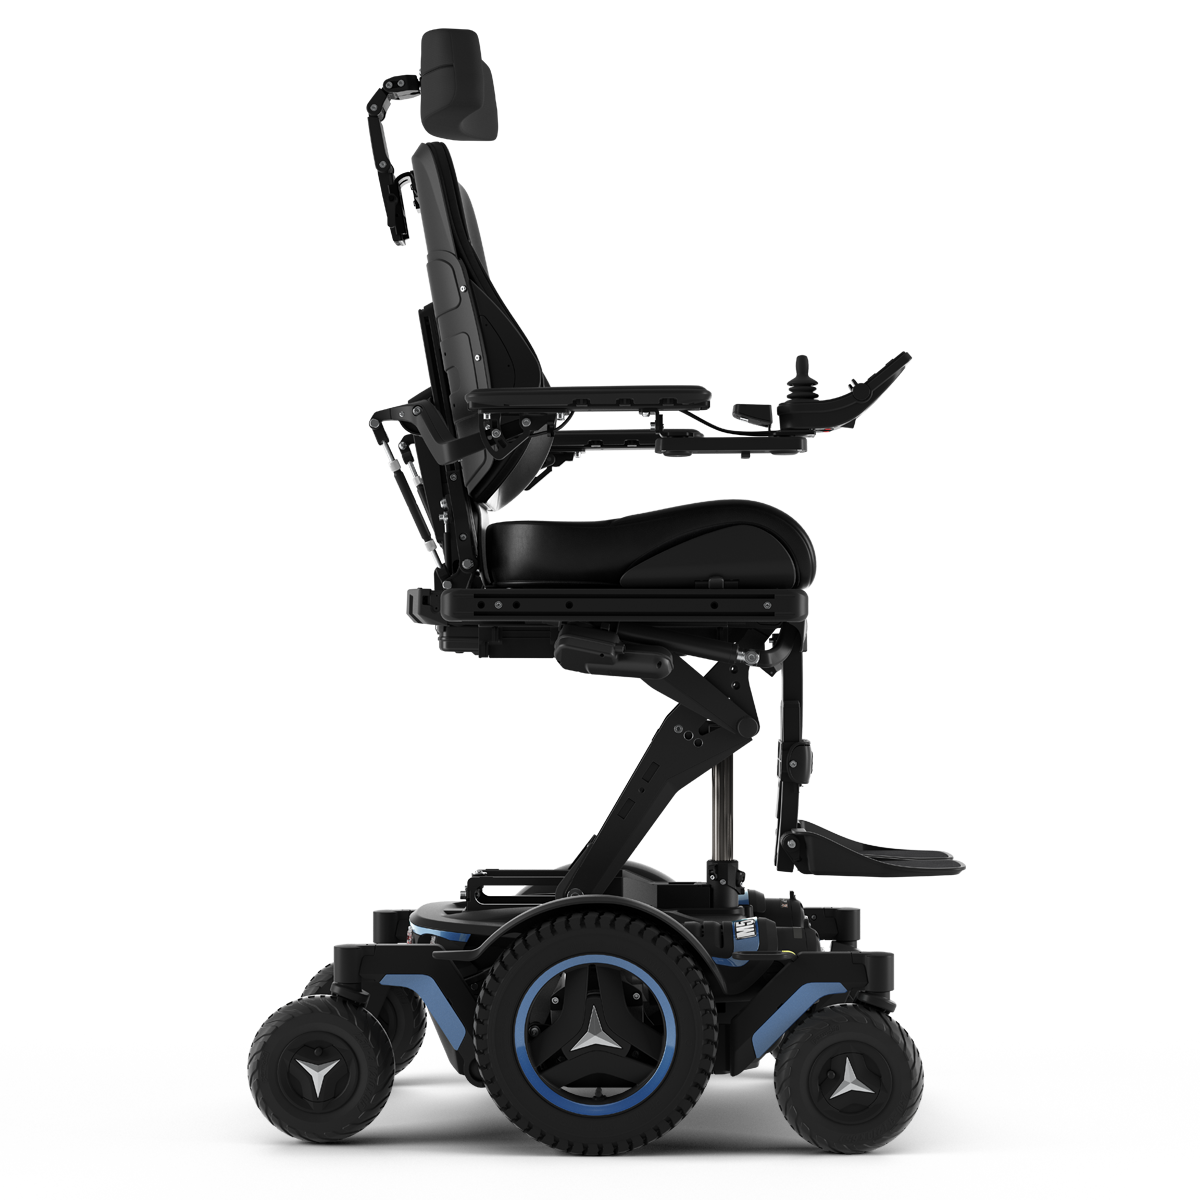 The Permobil Corpus M5 power chair with blue accents and black rehab seating is shown in an elevated position with the ActiveReach option.